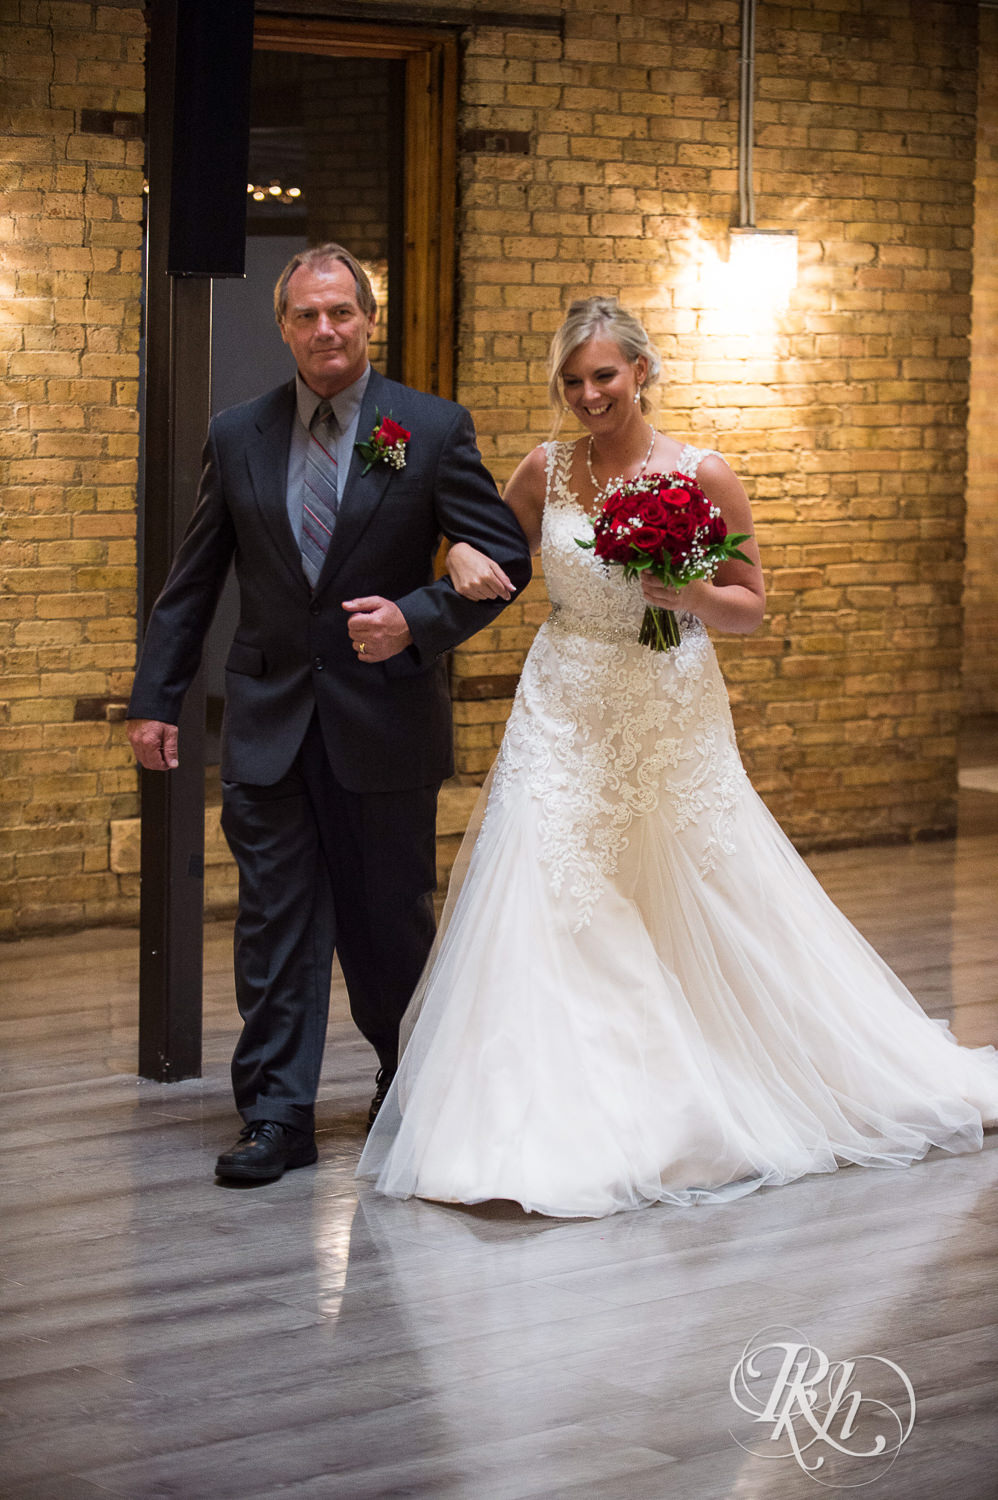 Bride and dad walk down the aisle during wedding ceremony at the Lumber Exchange Event Center in Minneapolis, Minnesota.